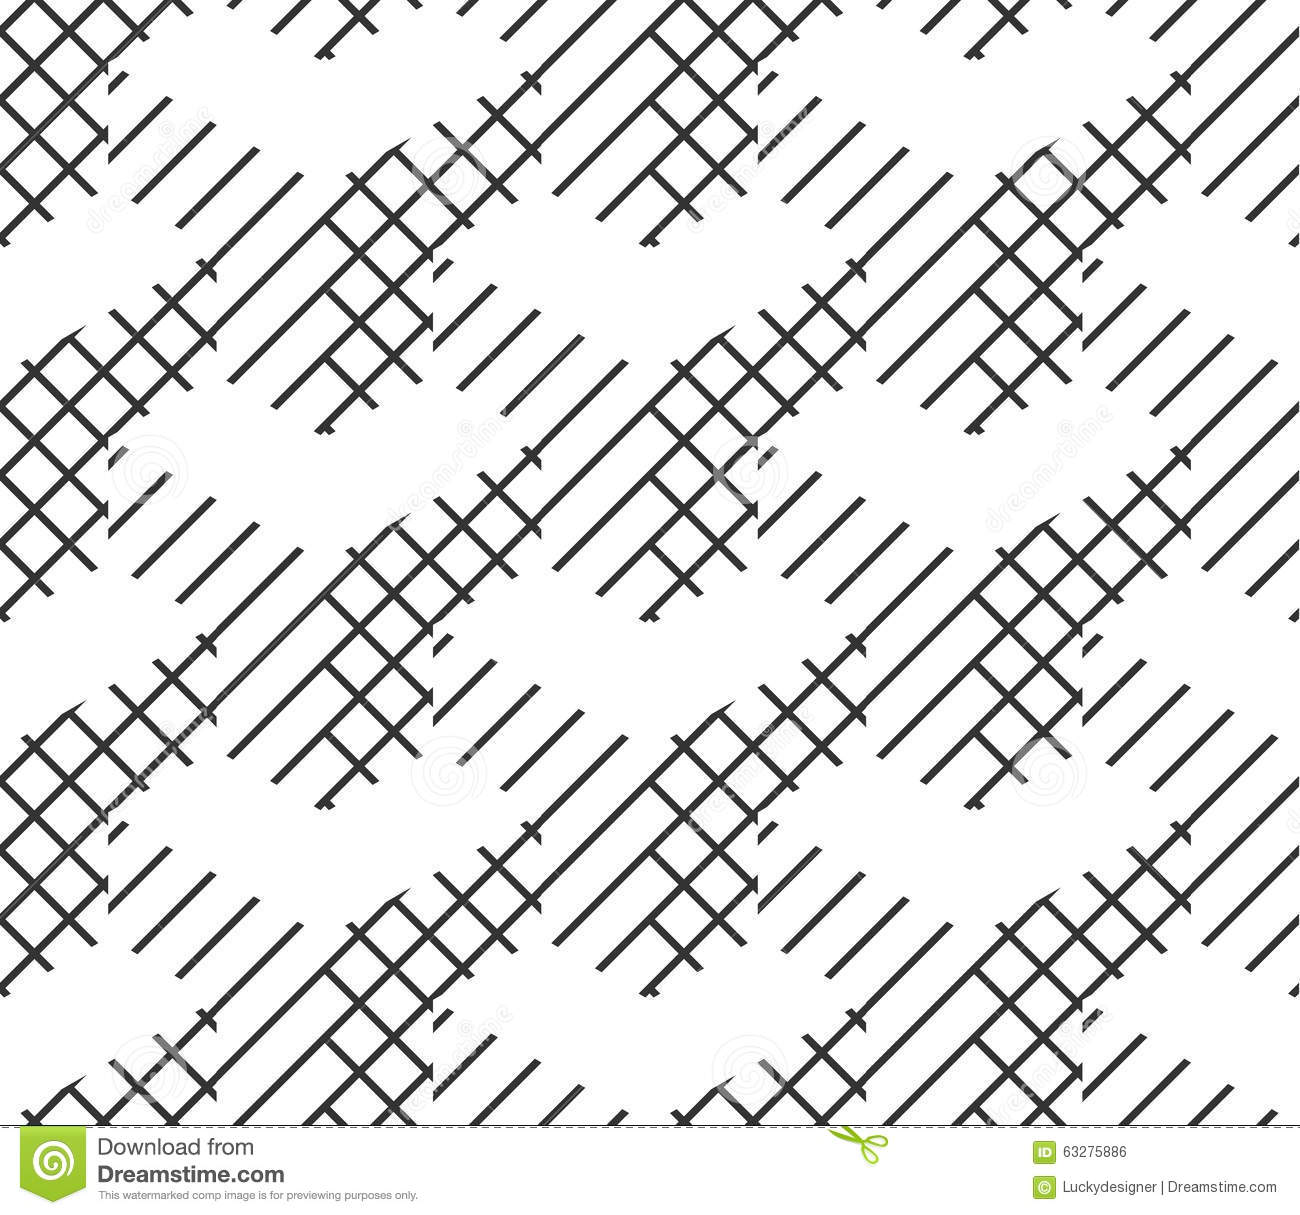 Black and White Geometric Pattern Vector